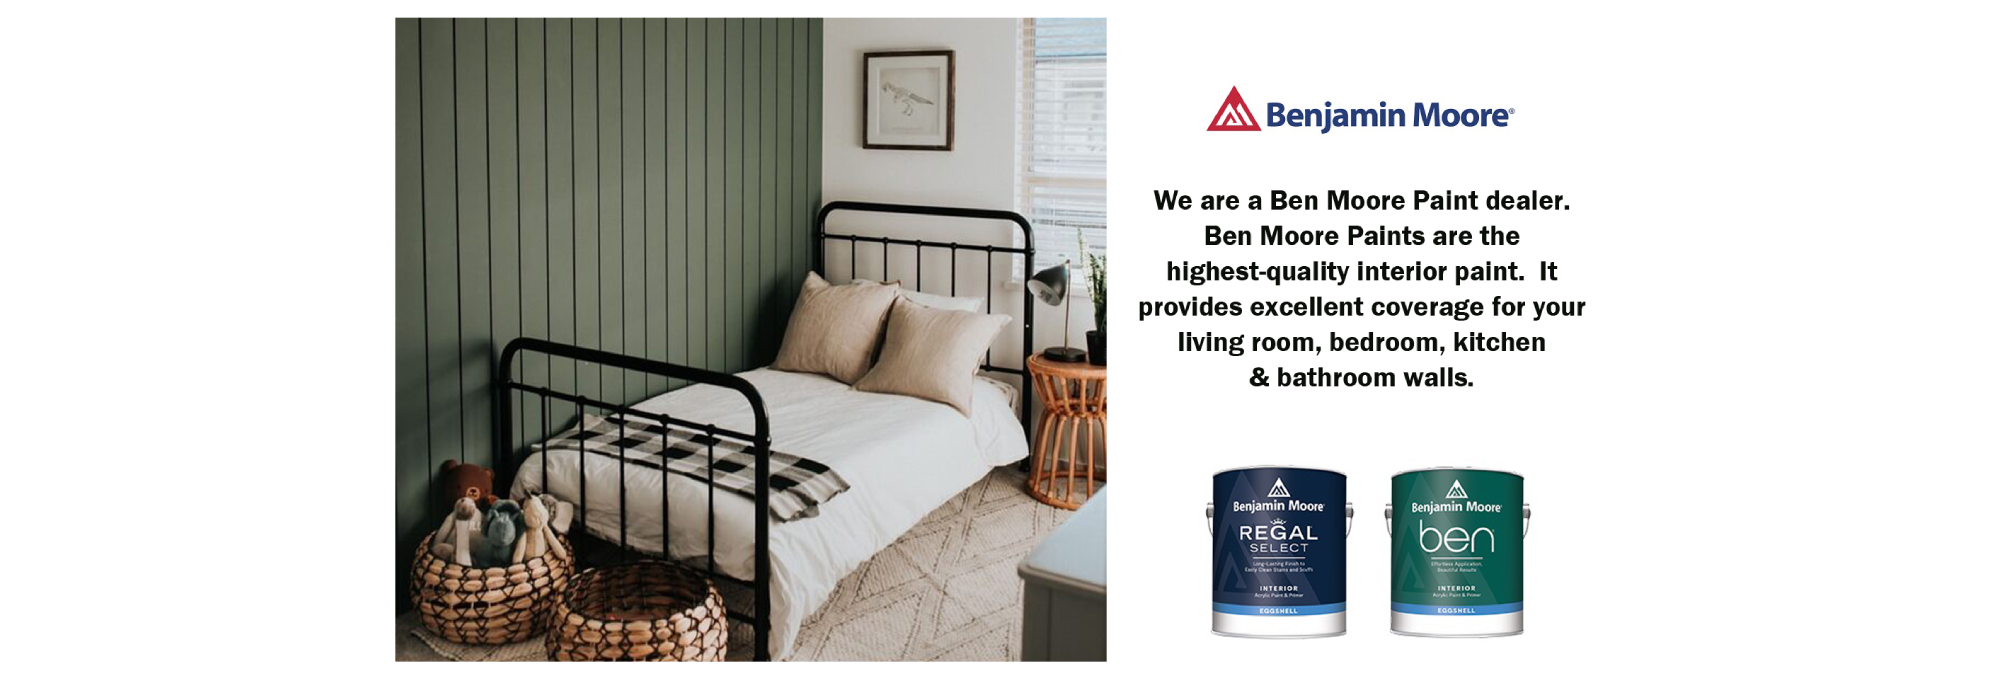 Benjamin Moore Paints give Rooms a Proper Transformation